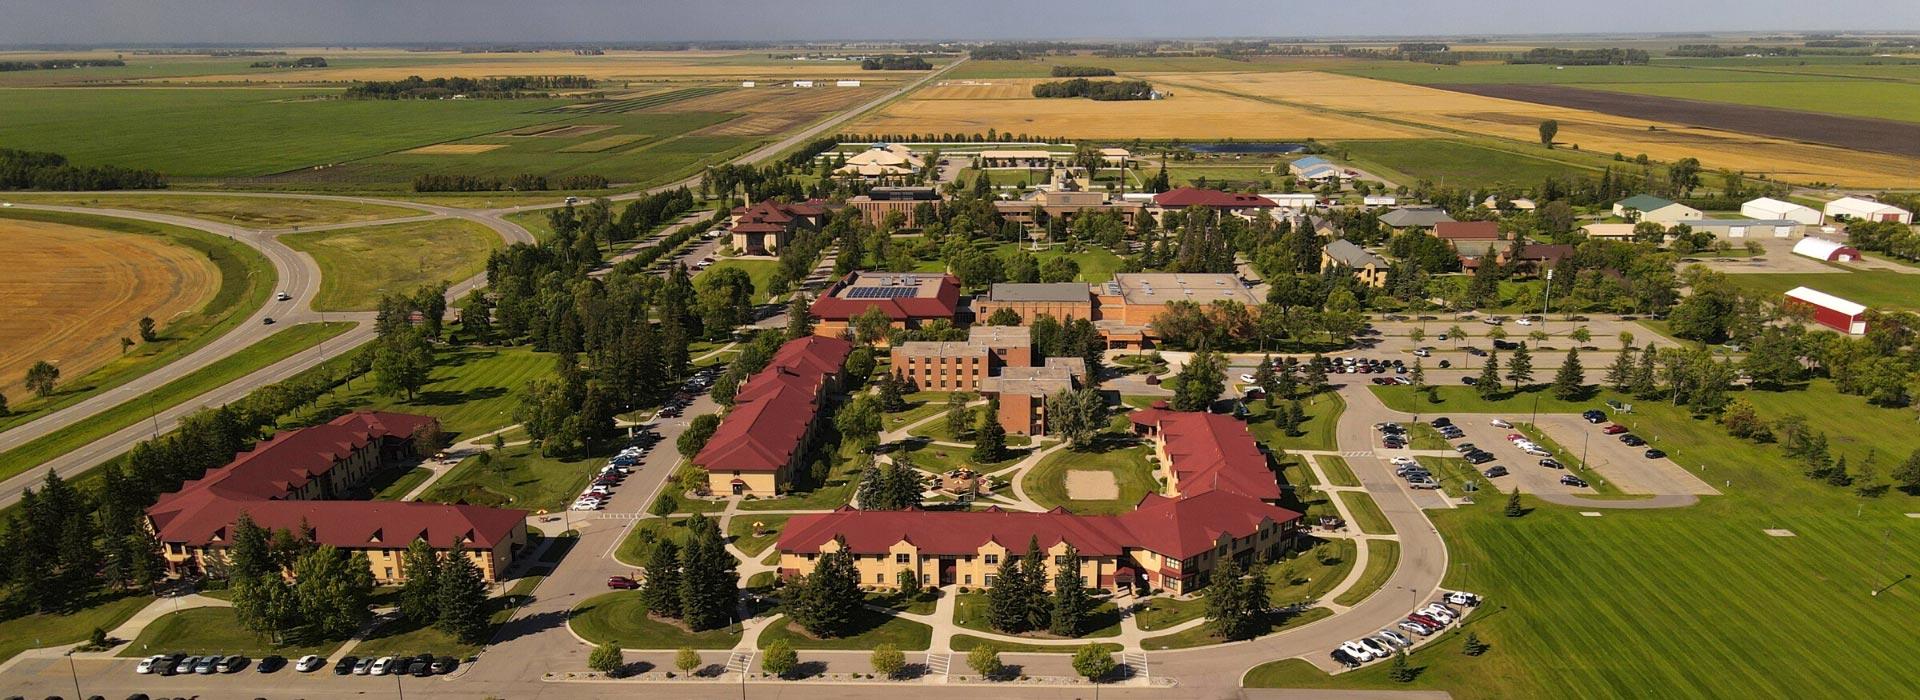 Aerial view of campus looking north.